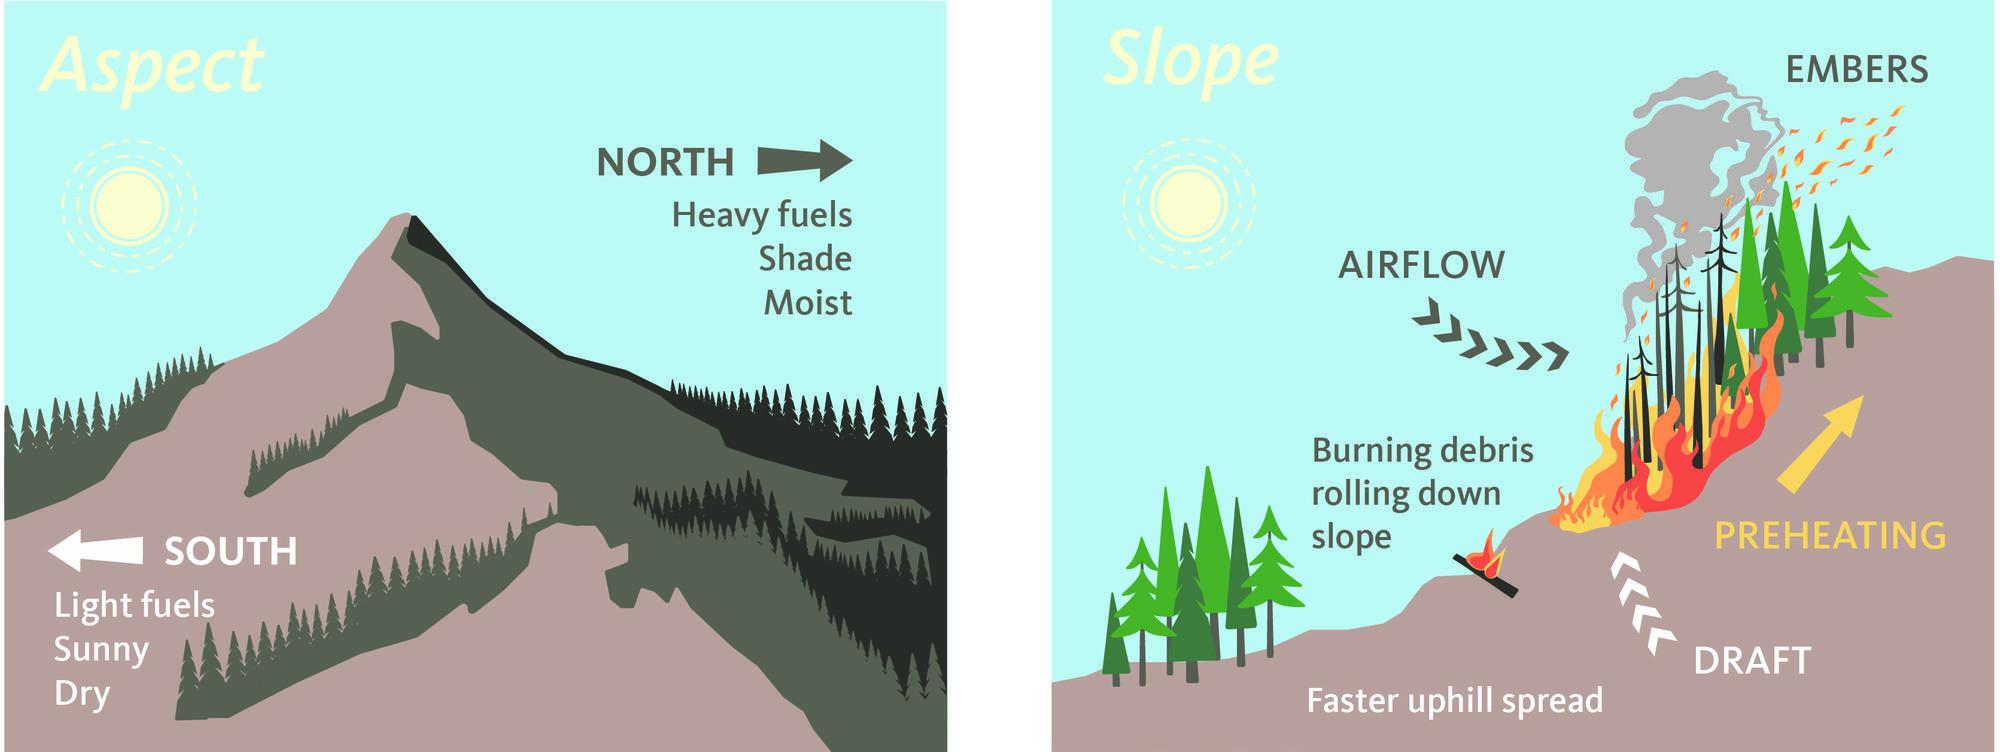 Aspect shows sides of a mountain; slope shows fire behavior on hill